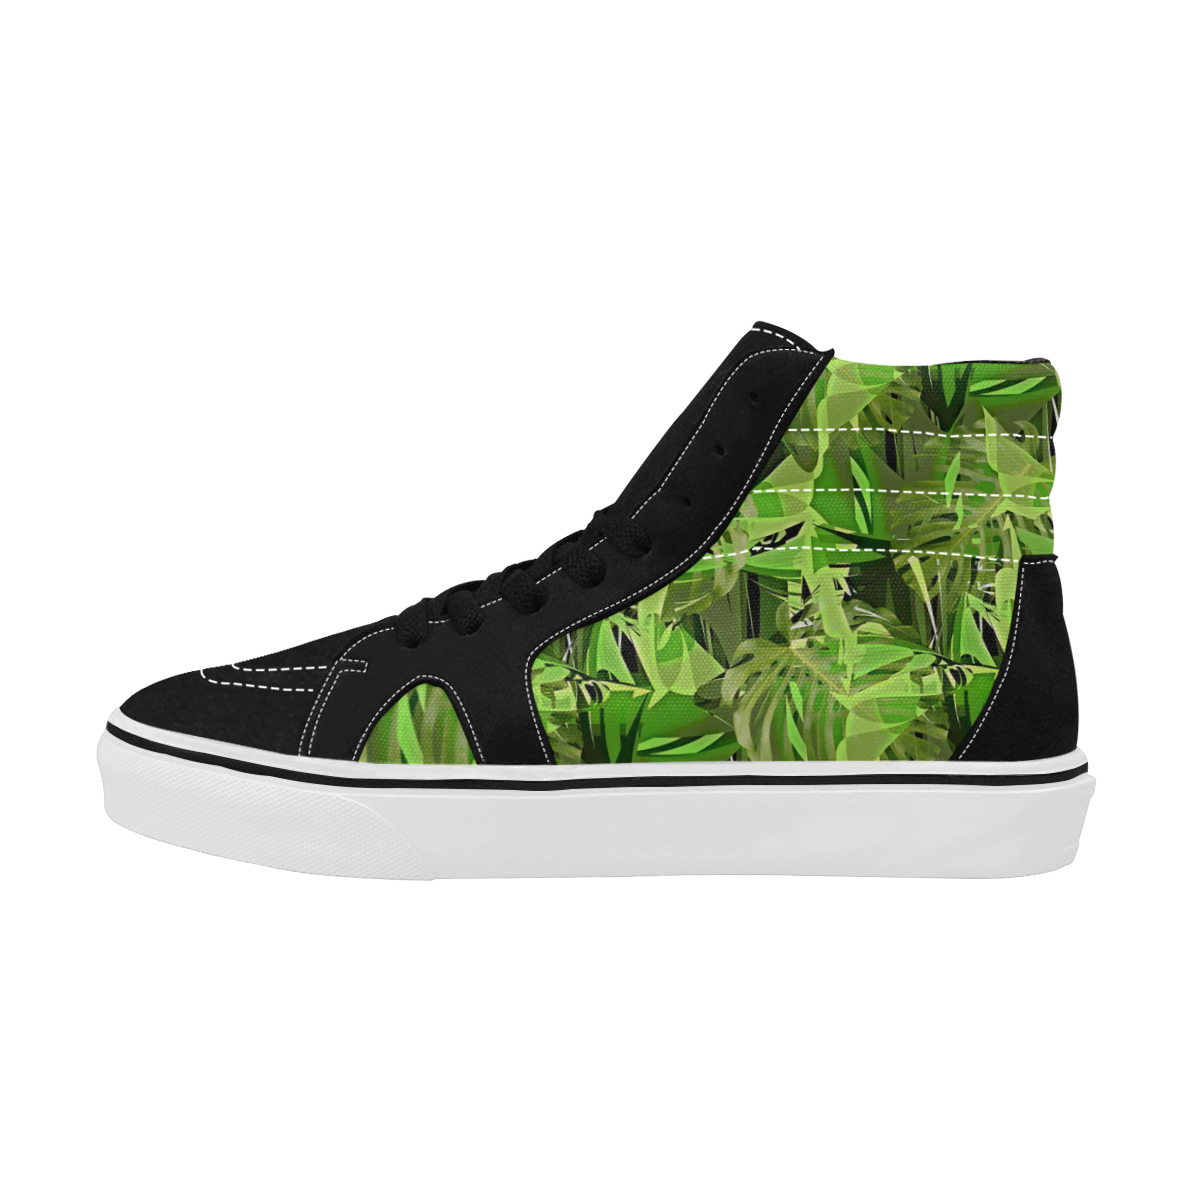 Tropical Jungle Leaves Camouflage Women's High Top Skateboarding Shoes/Large (Model E001-1)